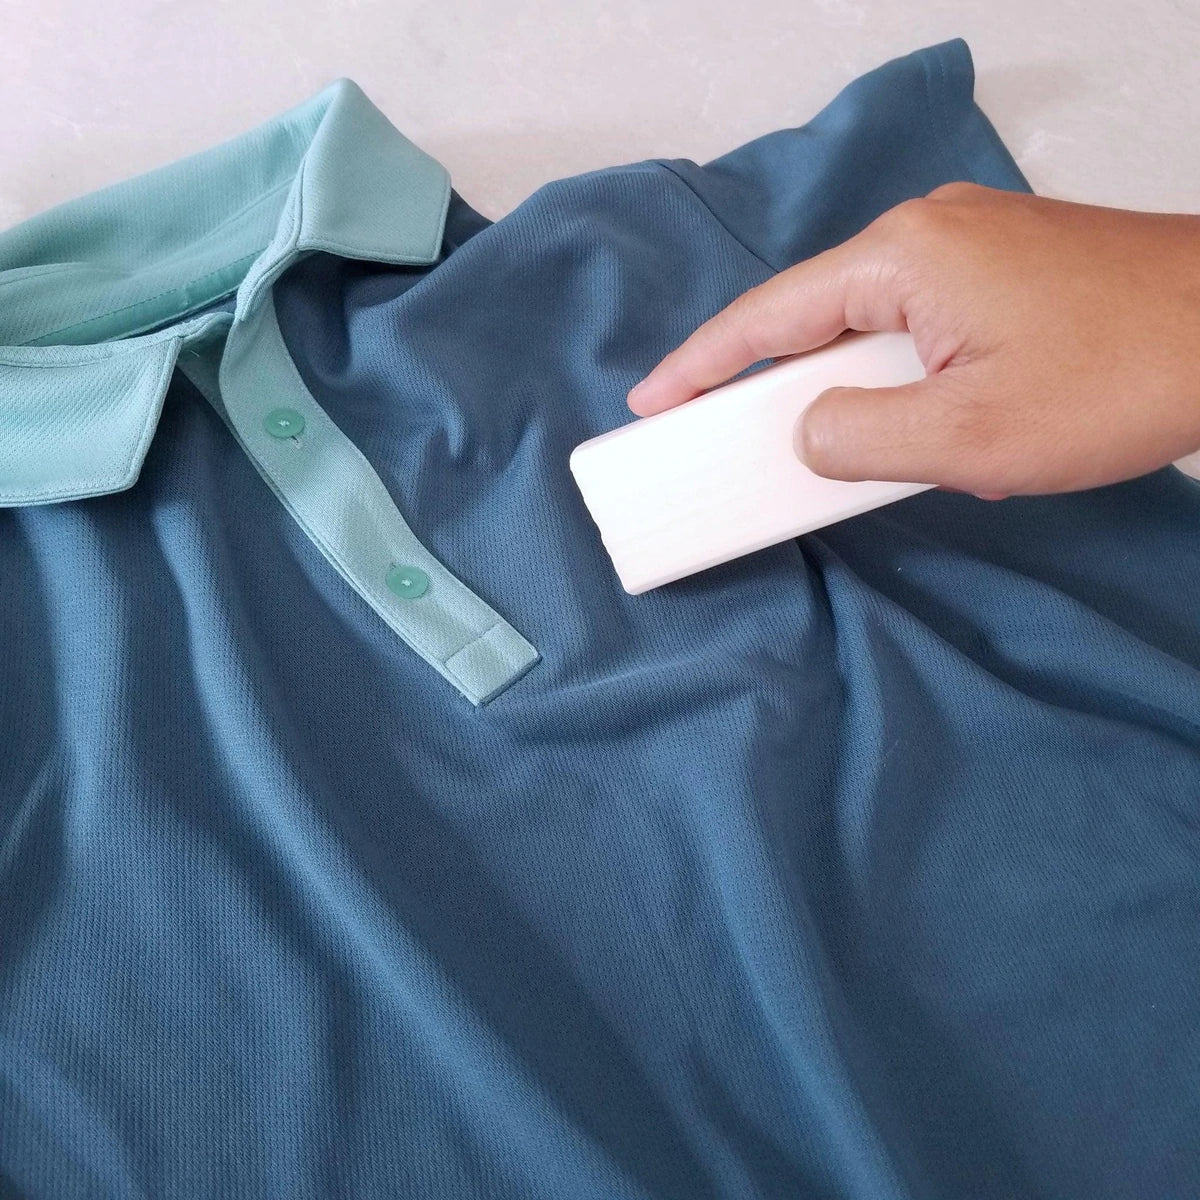 Remove ink stains: How to get ink out of clothes?